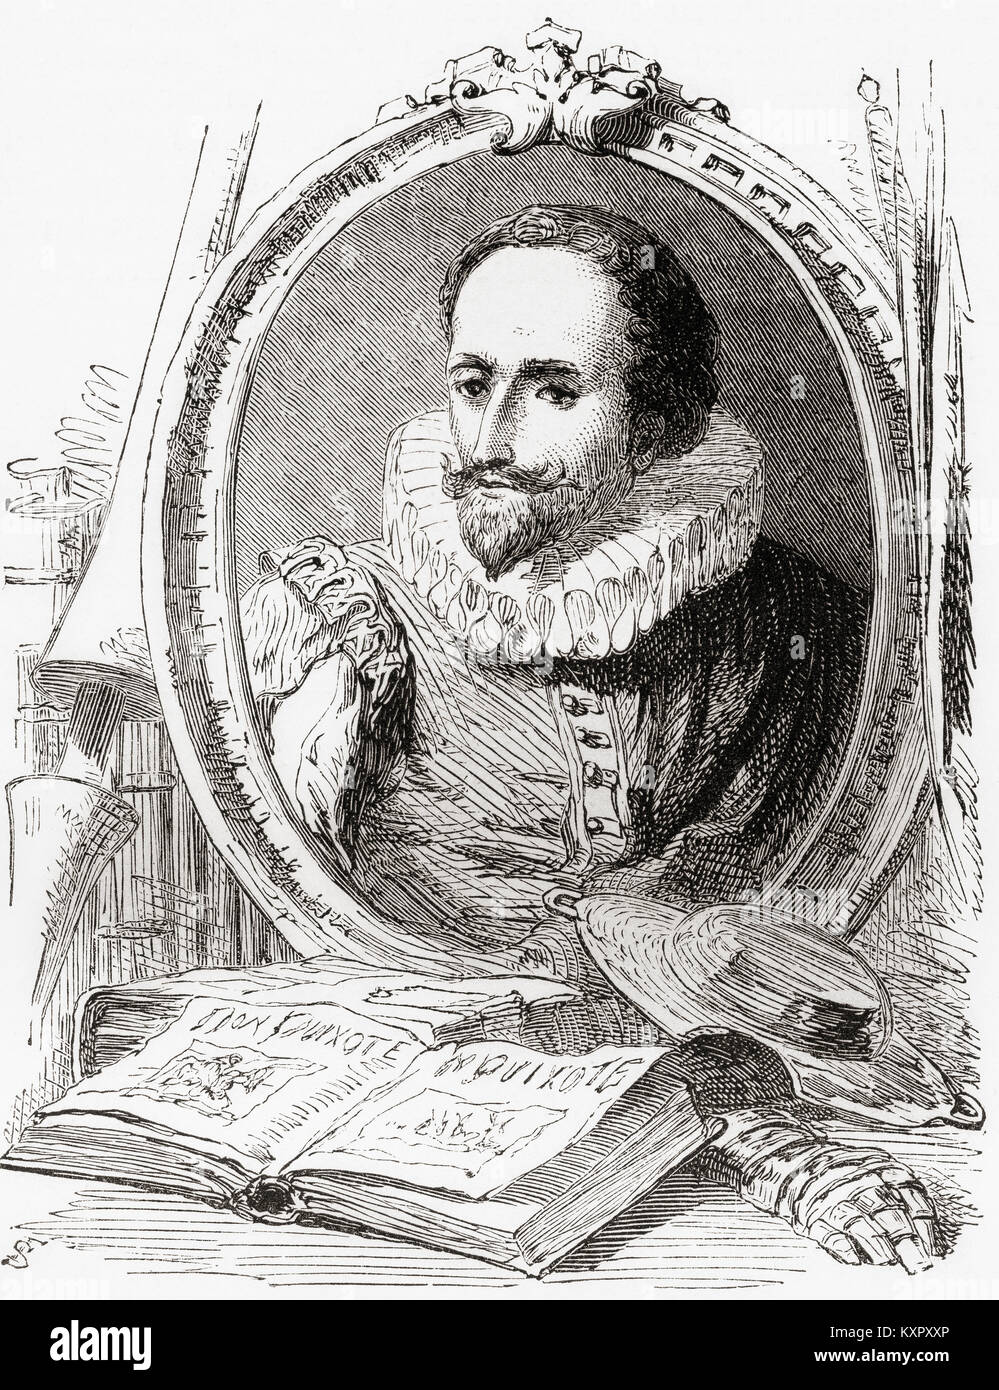 Miguel de Cervantes Saavedra, 1547 - 1616.  Spanish writer.  From Ward and Lock's Illustrated History of the World, published c.1882. Stock Photo